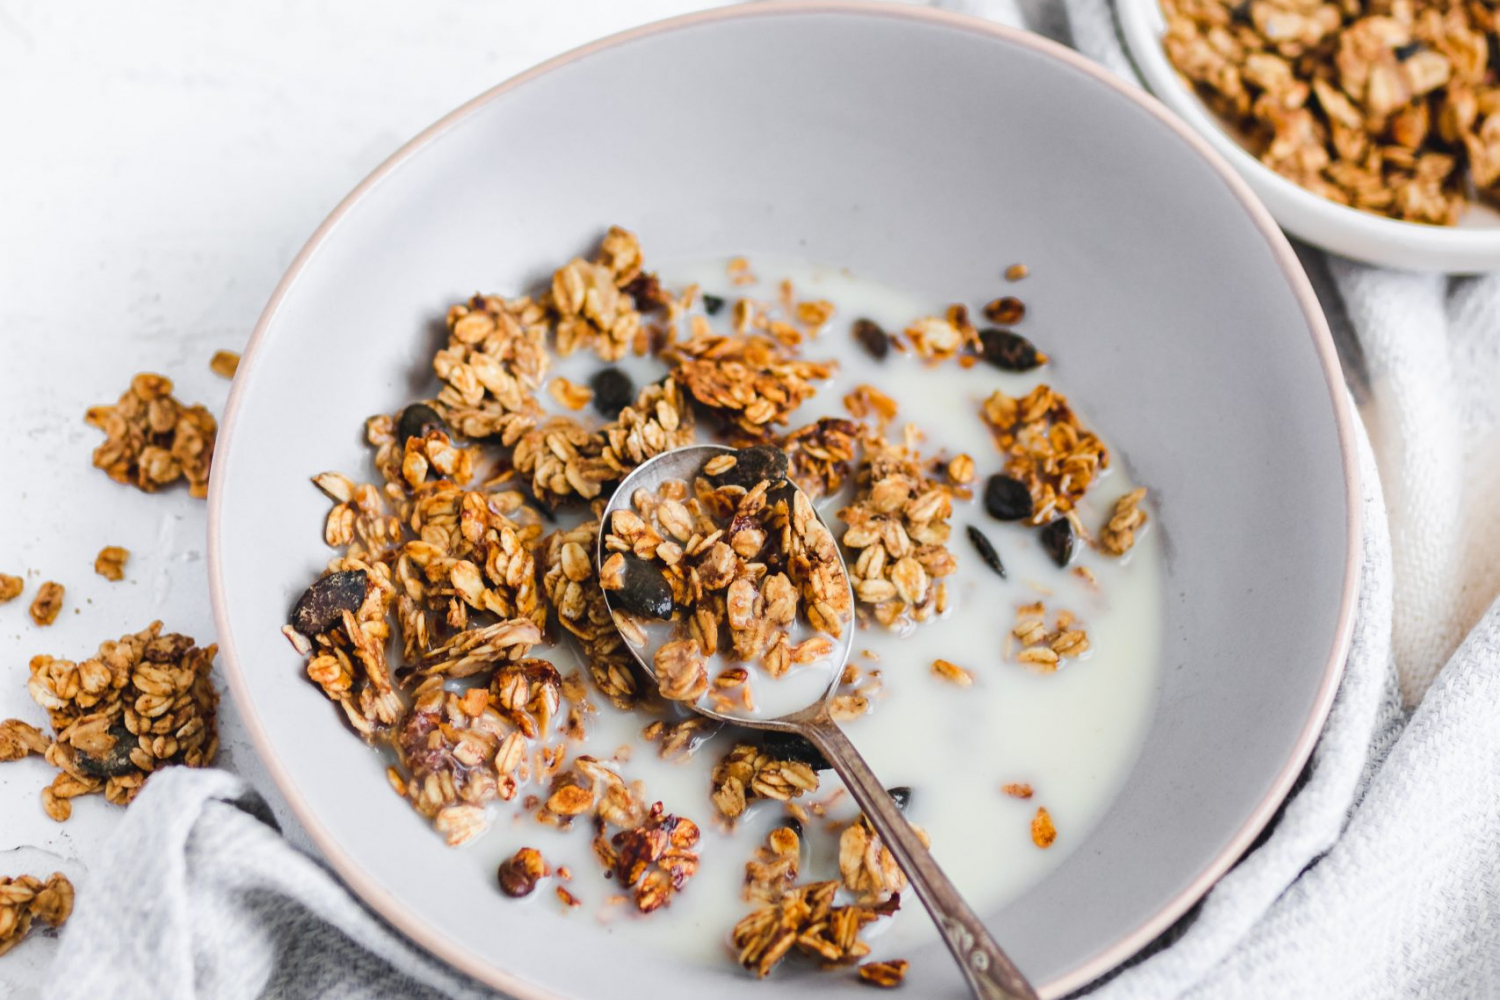 Oil Free Peanut Butter and Banana Granola in a bowl with milk, spoon taken out